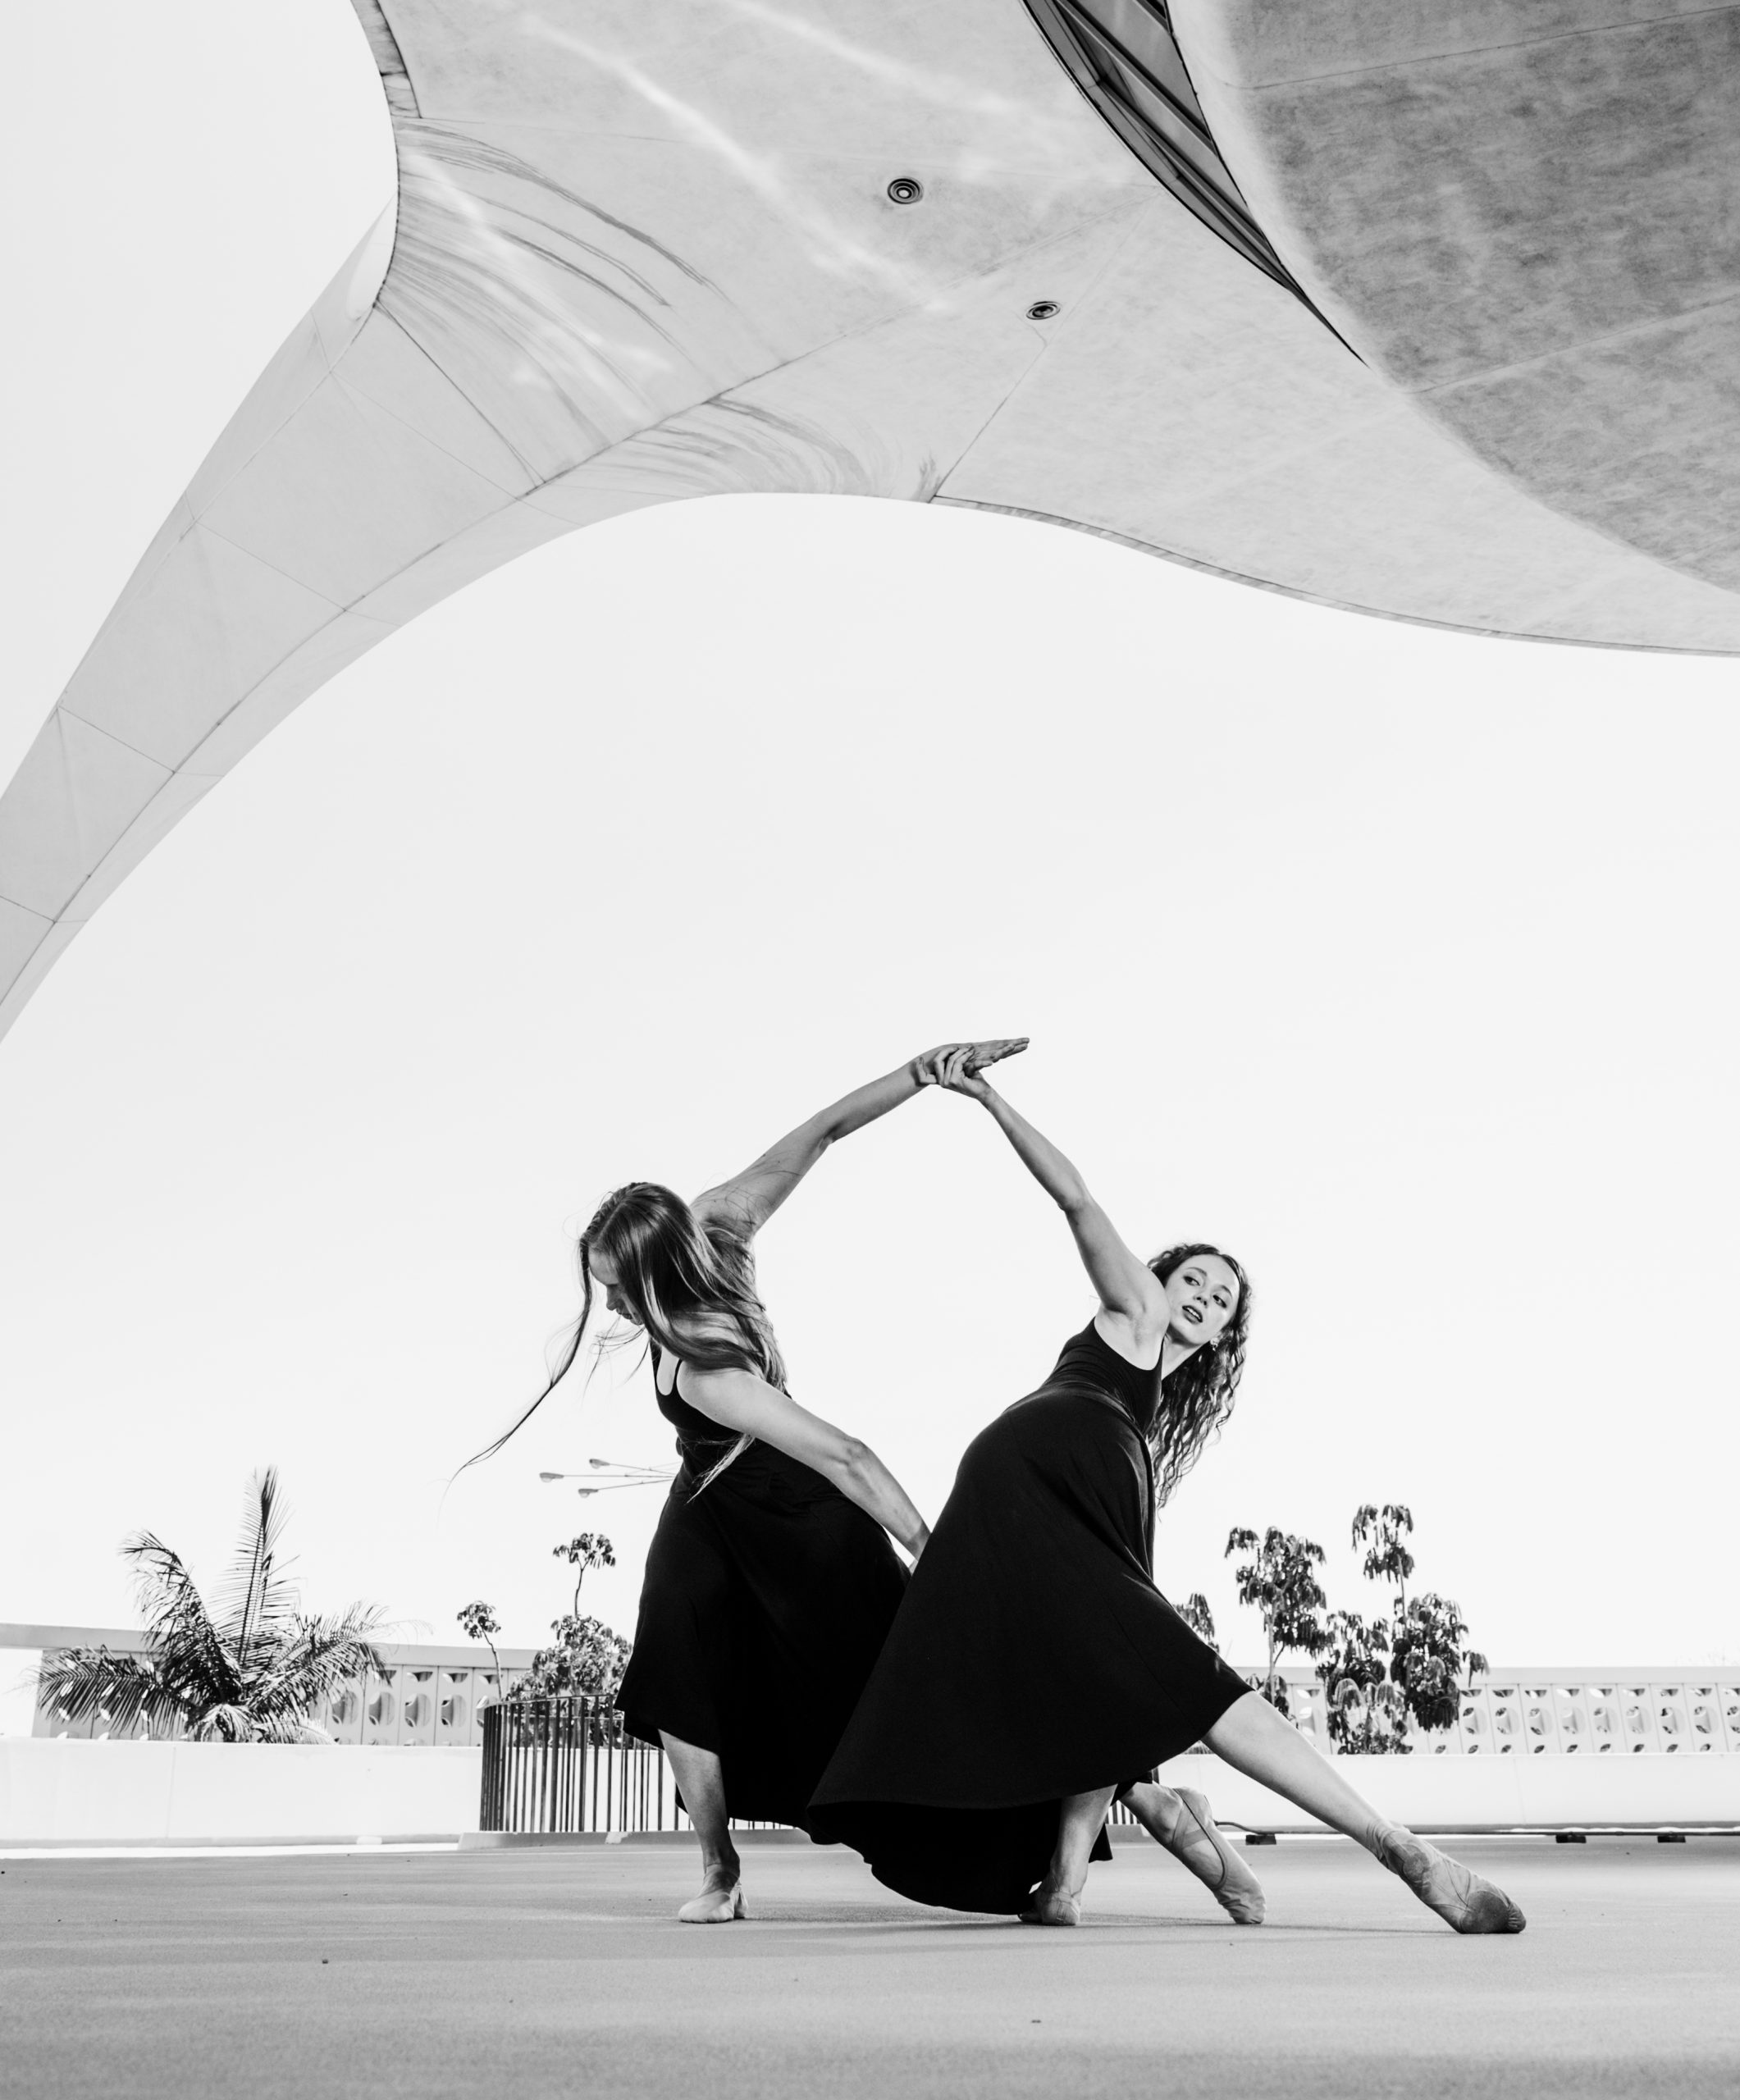 MAJOR INTERNATIONAL DANCE FESTIVAL CURATED BY BENJAMIN MILLEPIED AND NICO MUHLY TO TAKE PLACE IN QATAR